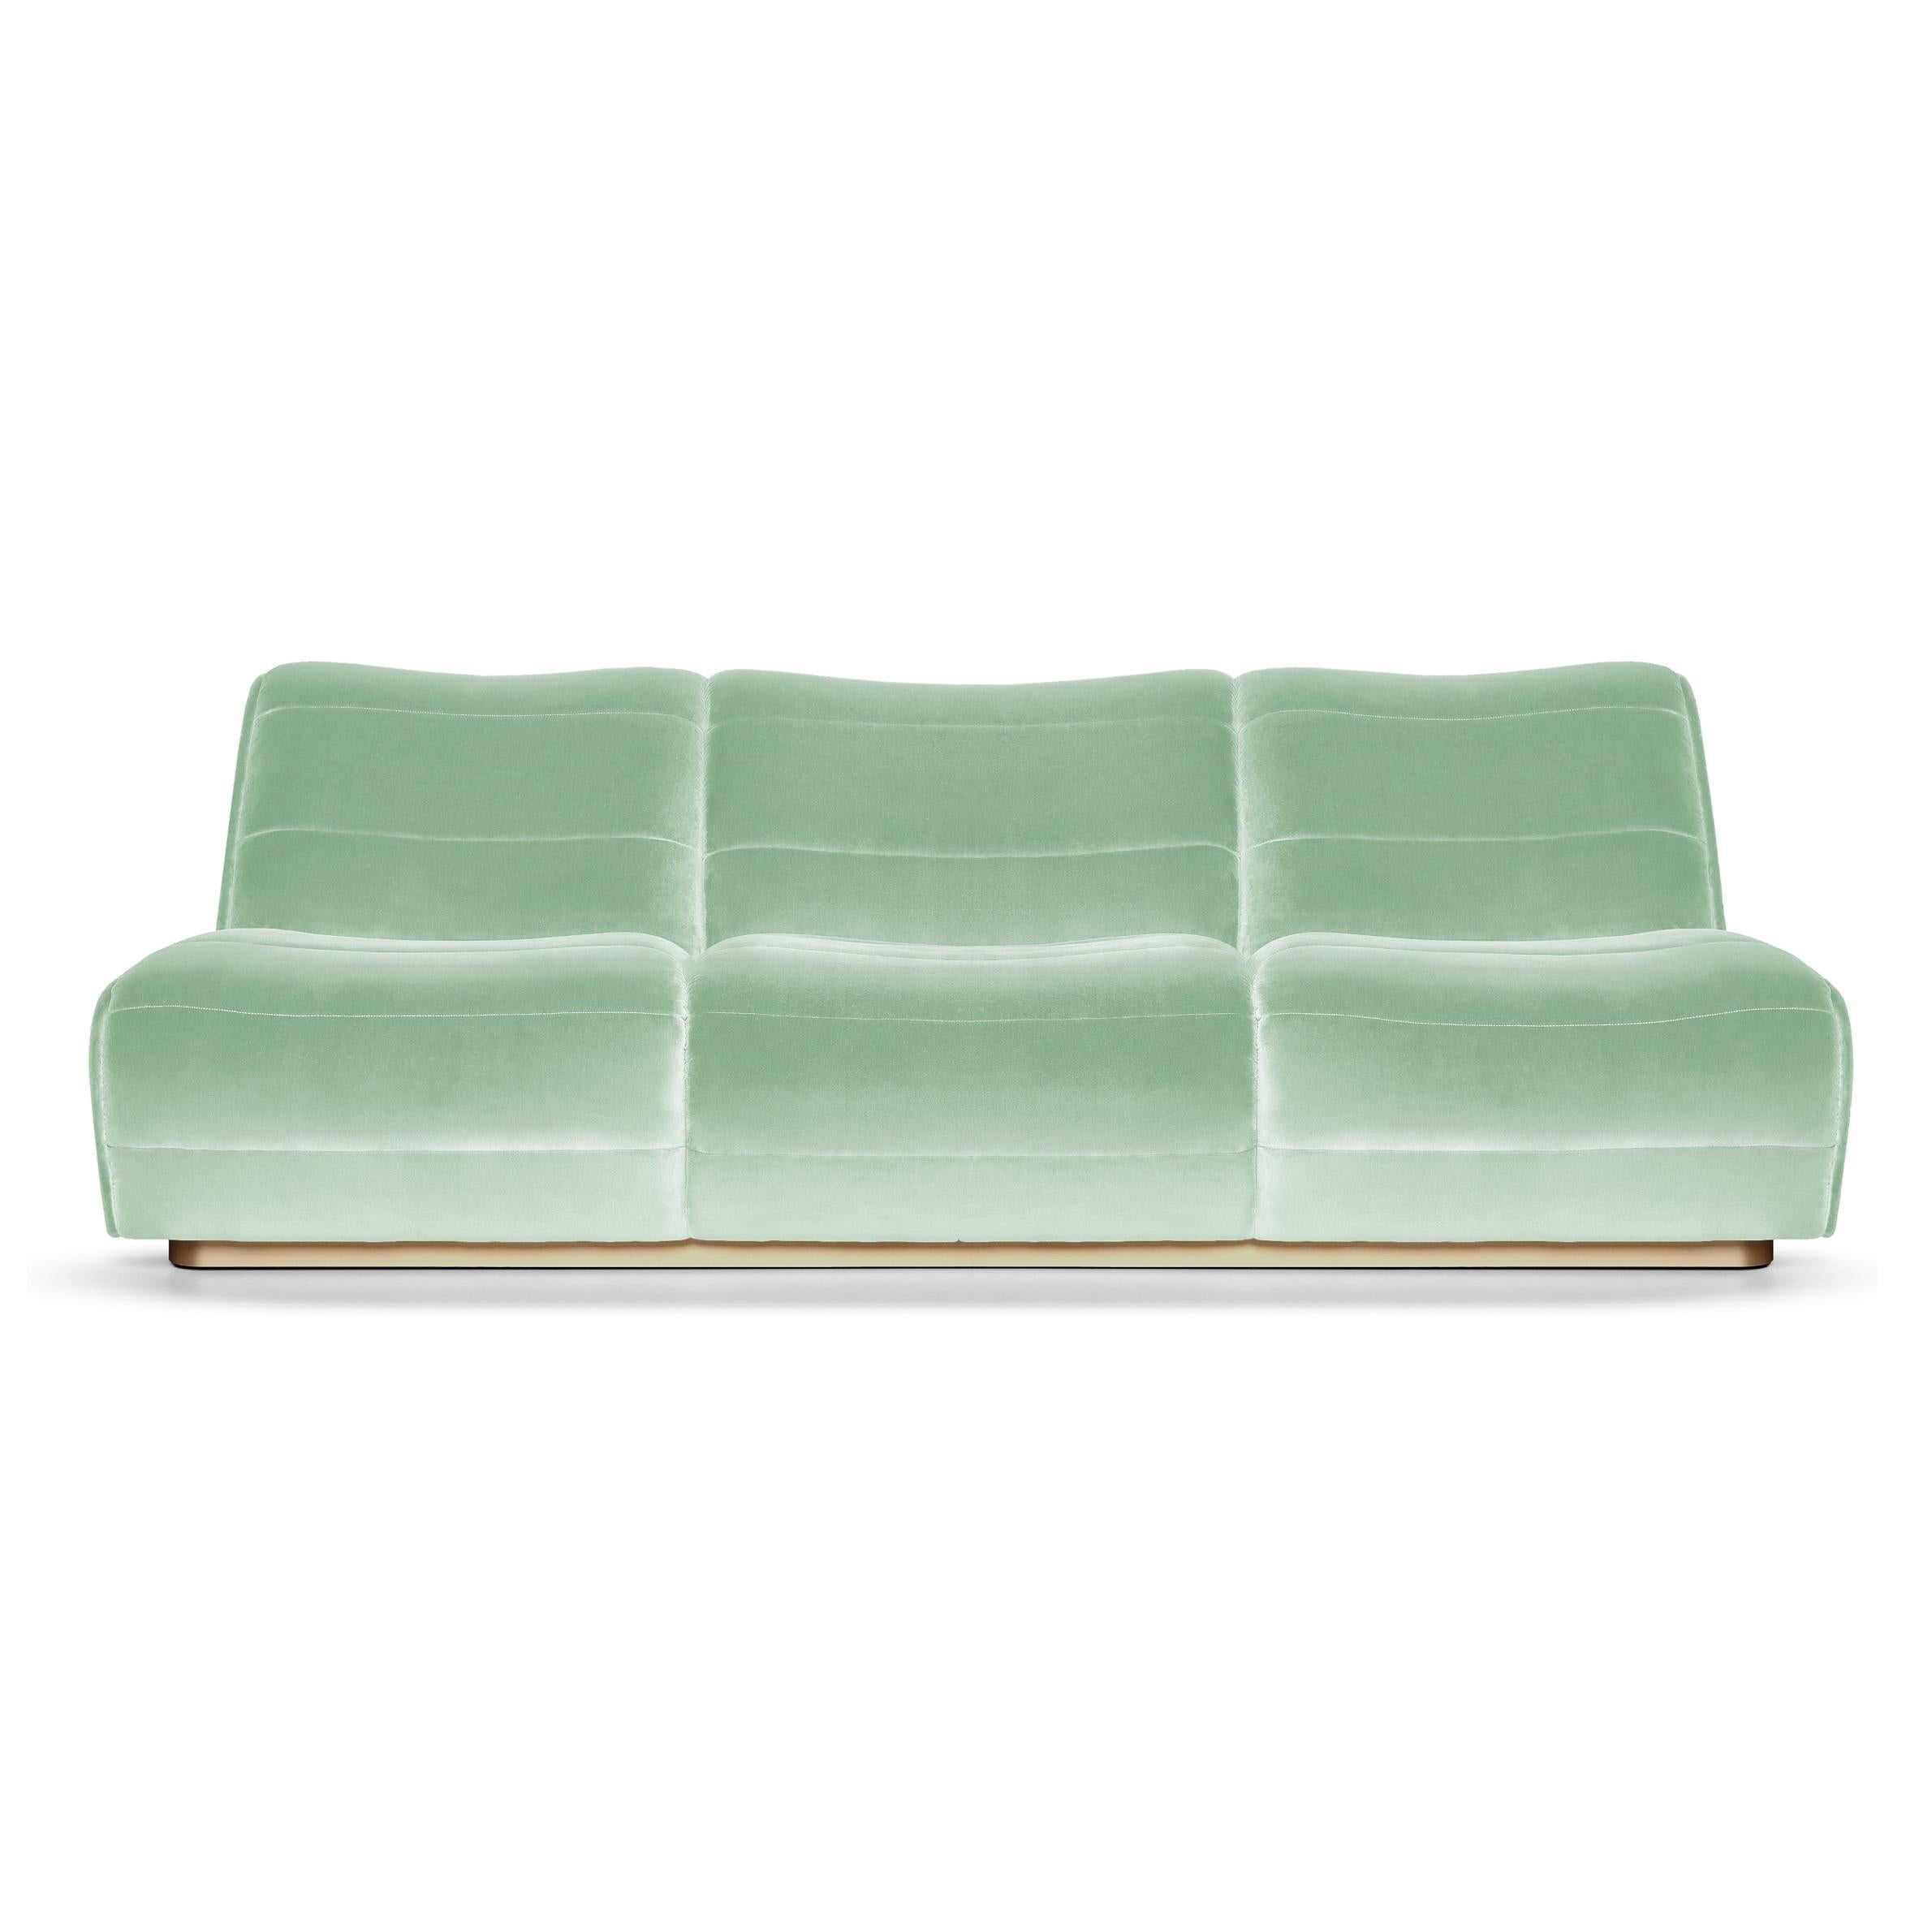 Portuguese Contemporary 3 Seat Sofa Offered in Velvet & Metal Base For Sale